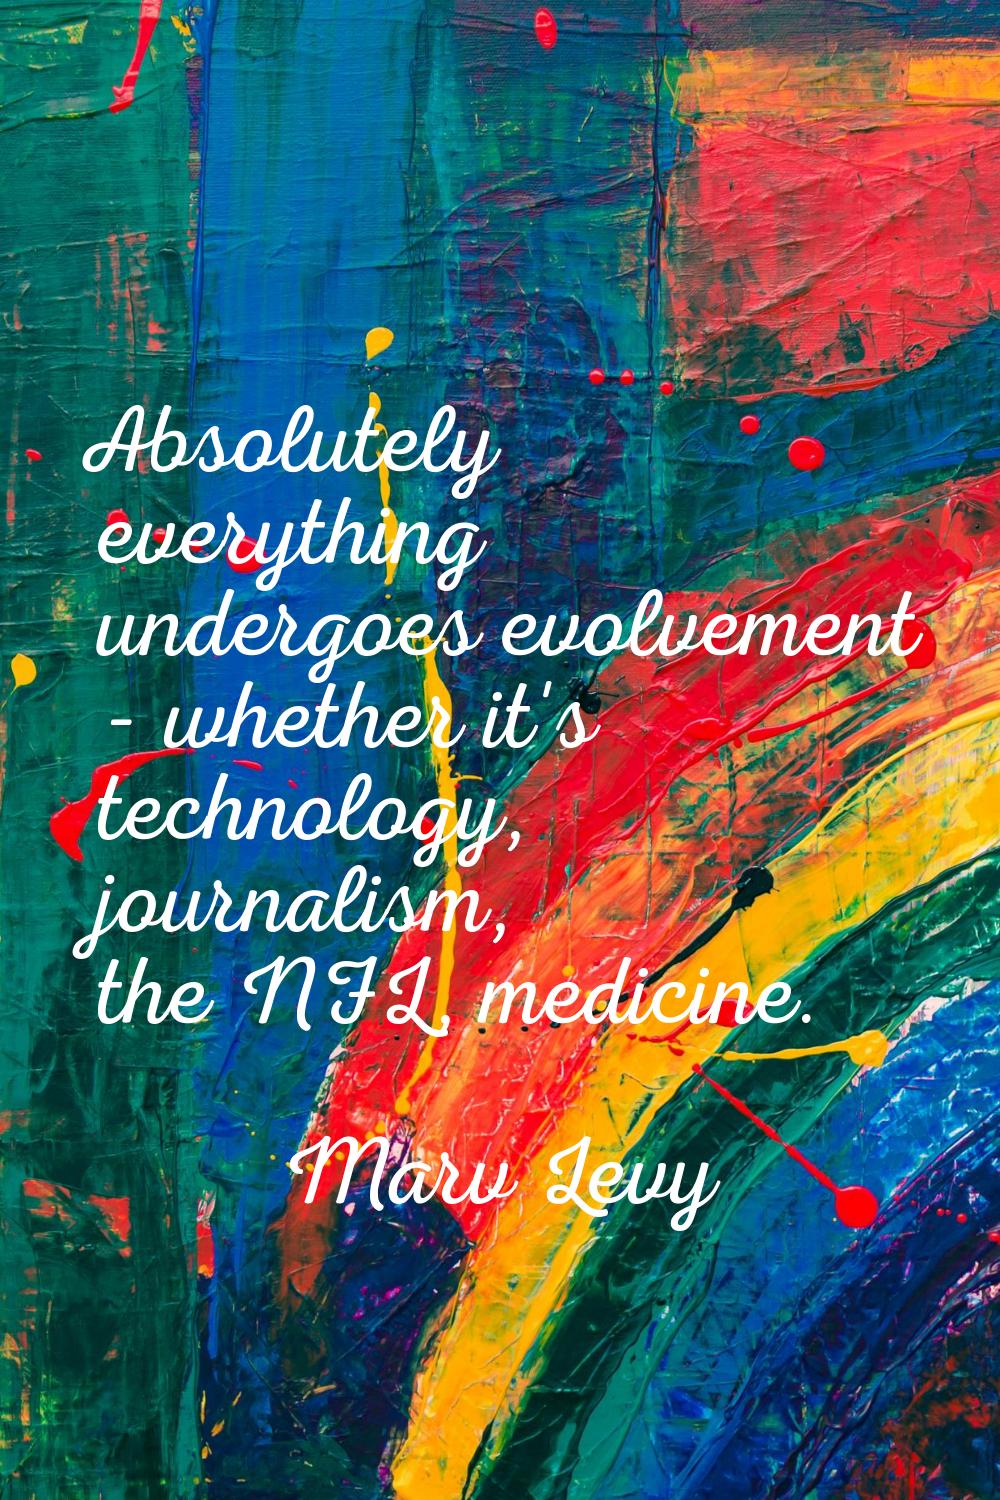 Absolutely everything undergoes evolvement - whether it's technology, journalism, the NFL, medicine